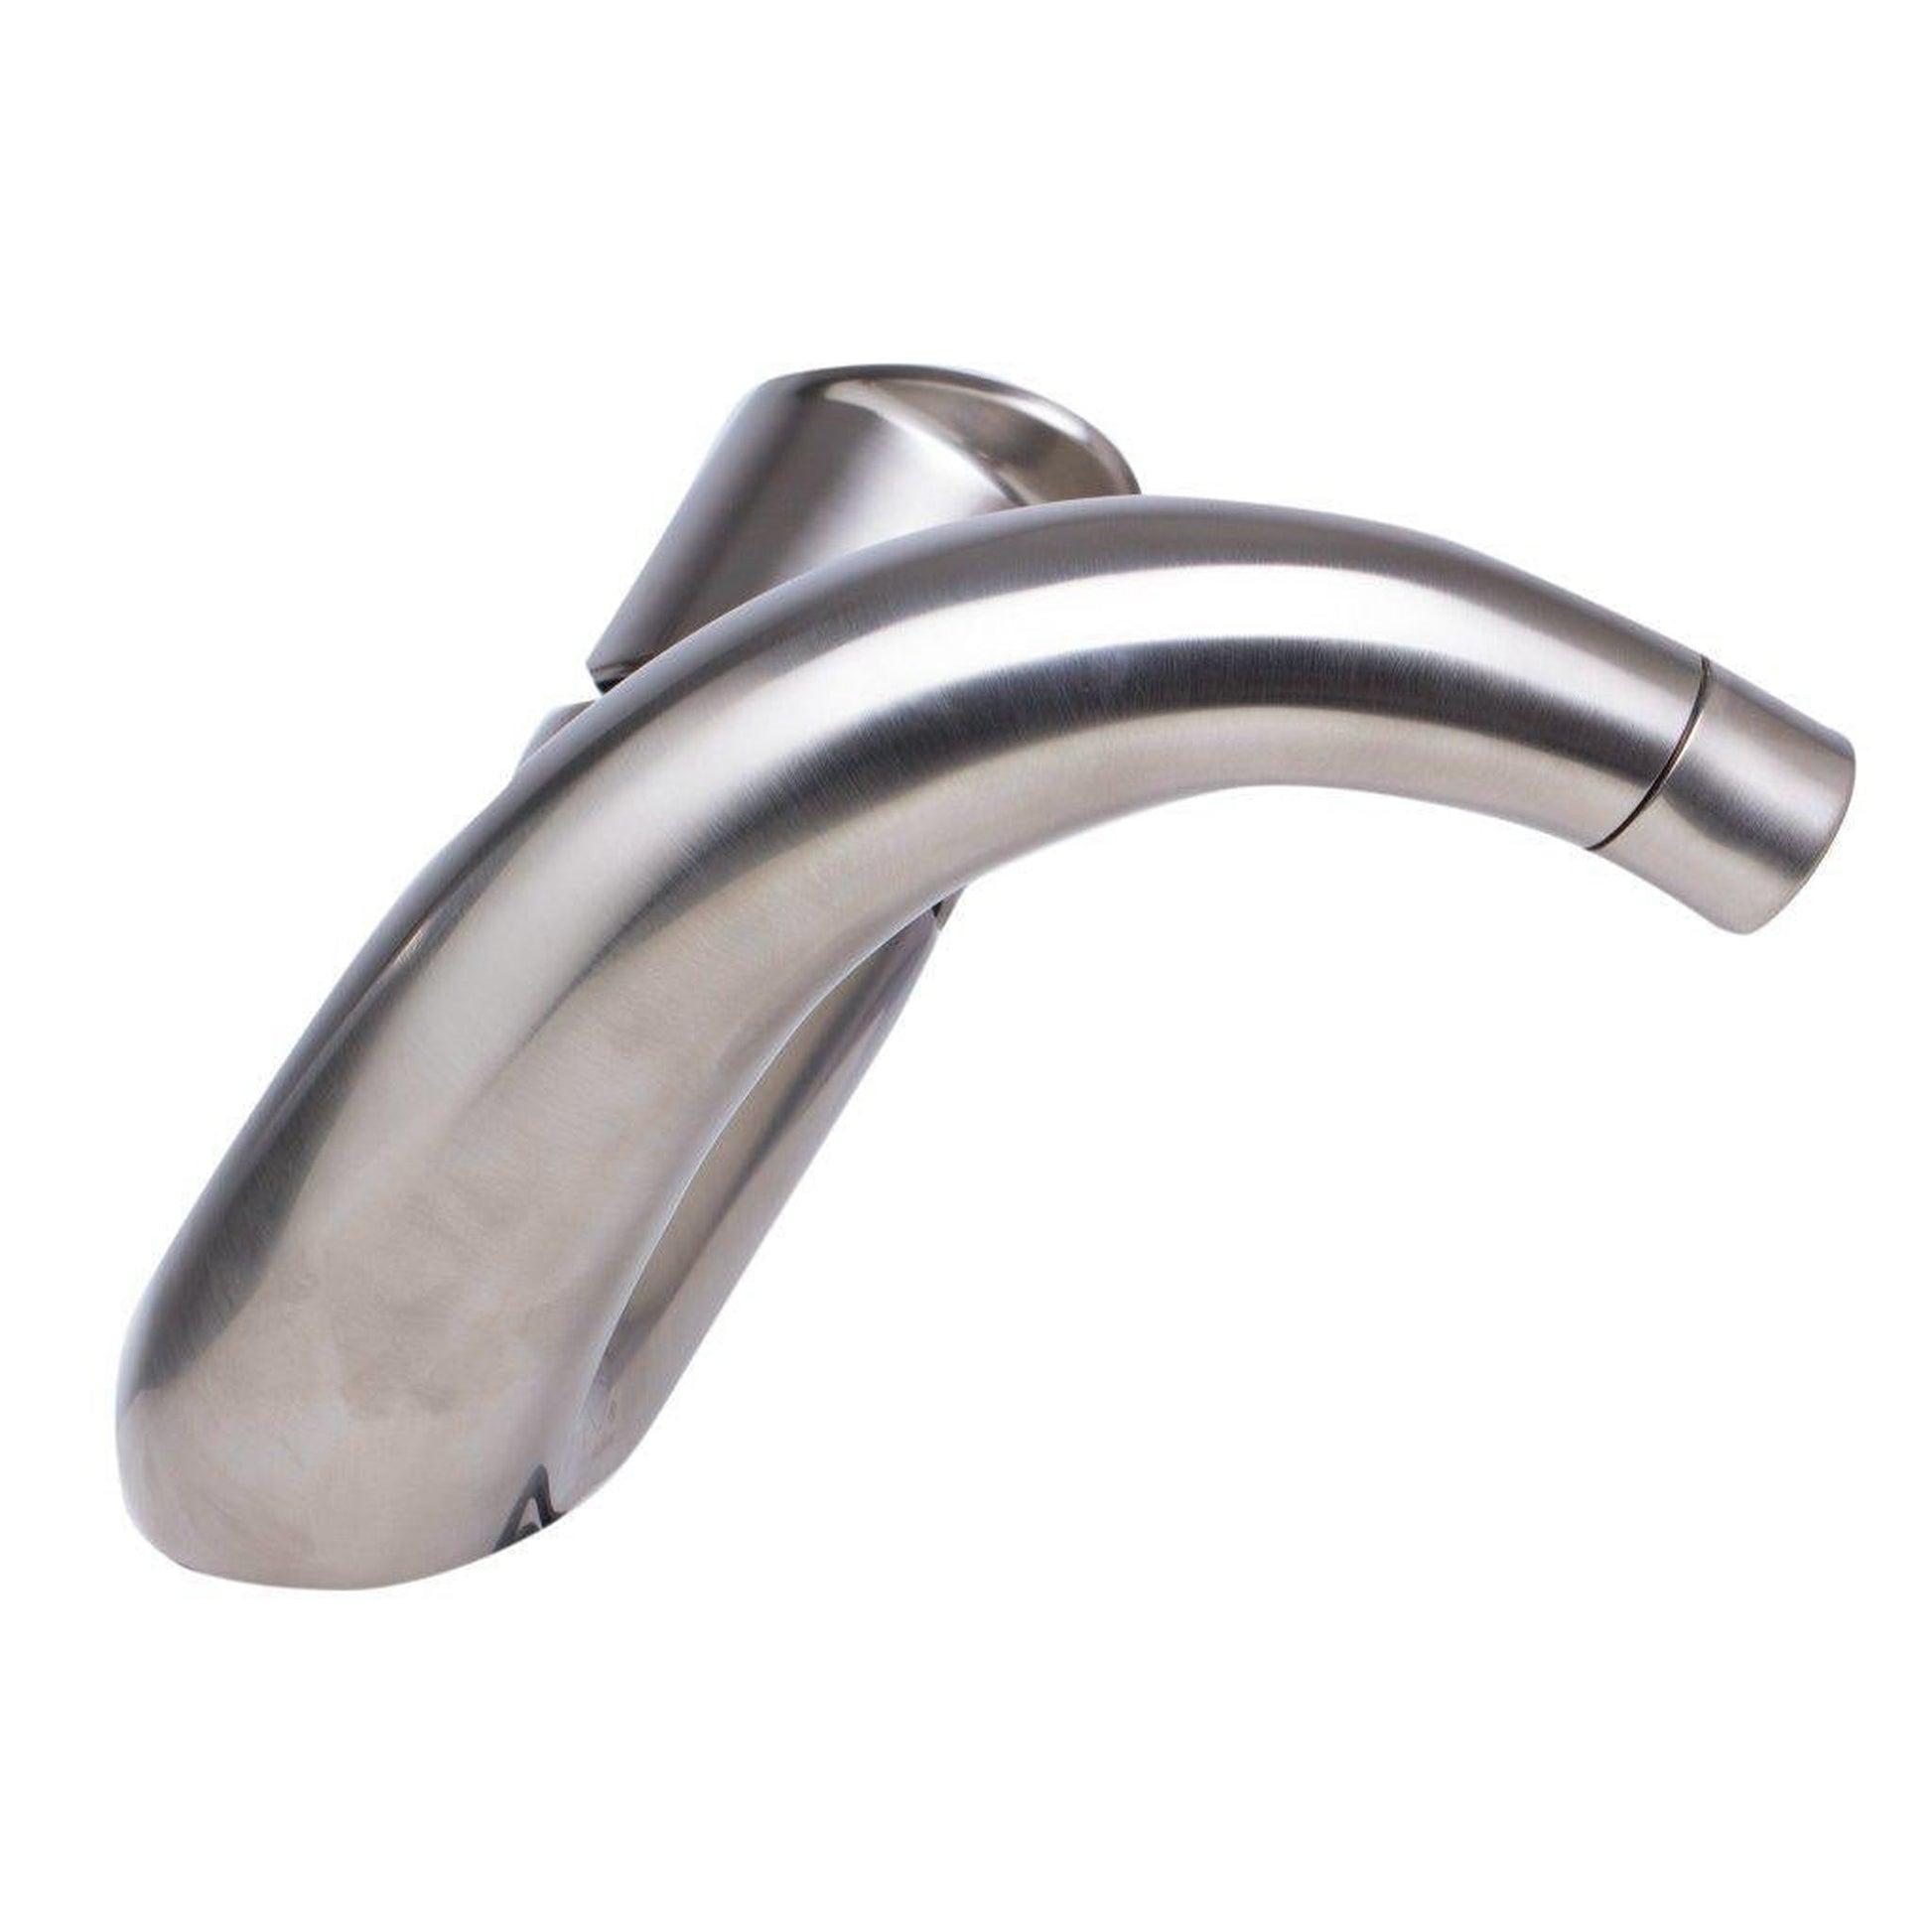 ALFI Brand AB1572-BN Brushed Nickel Wave Spout Brass Bathroom Sink Faucet With Single Lever